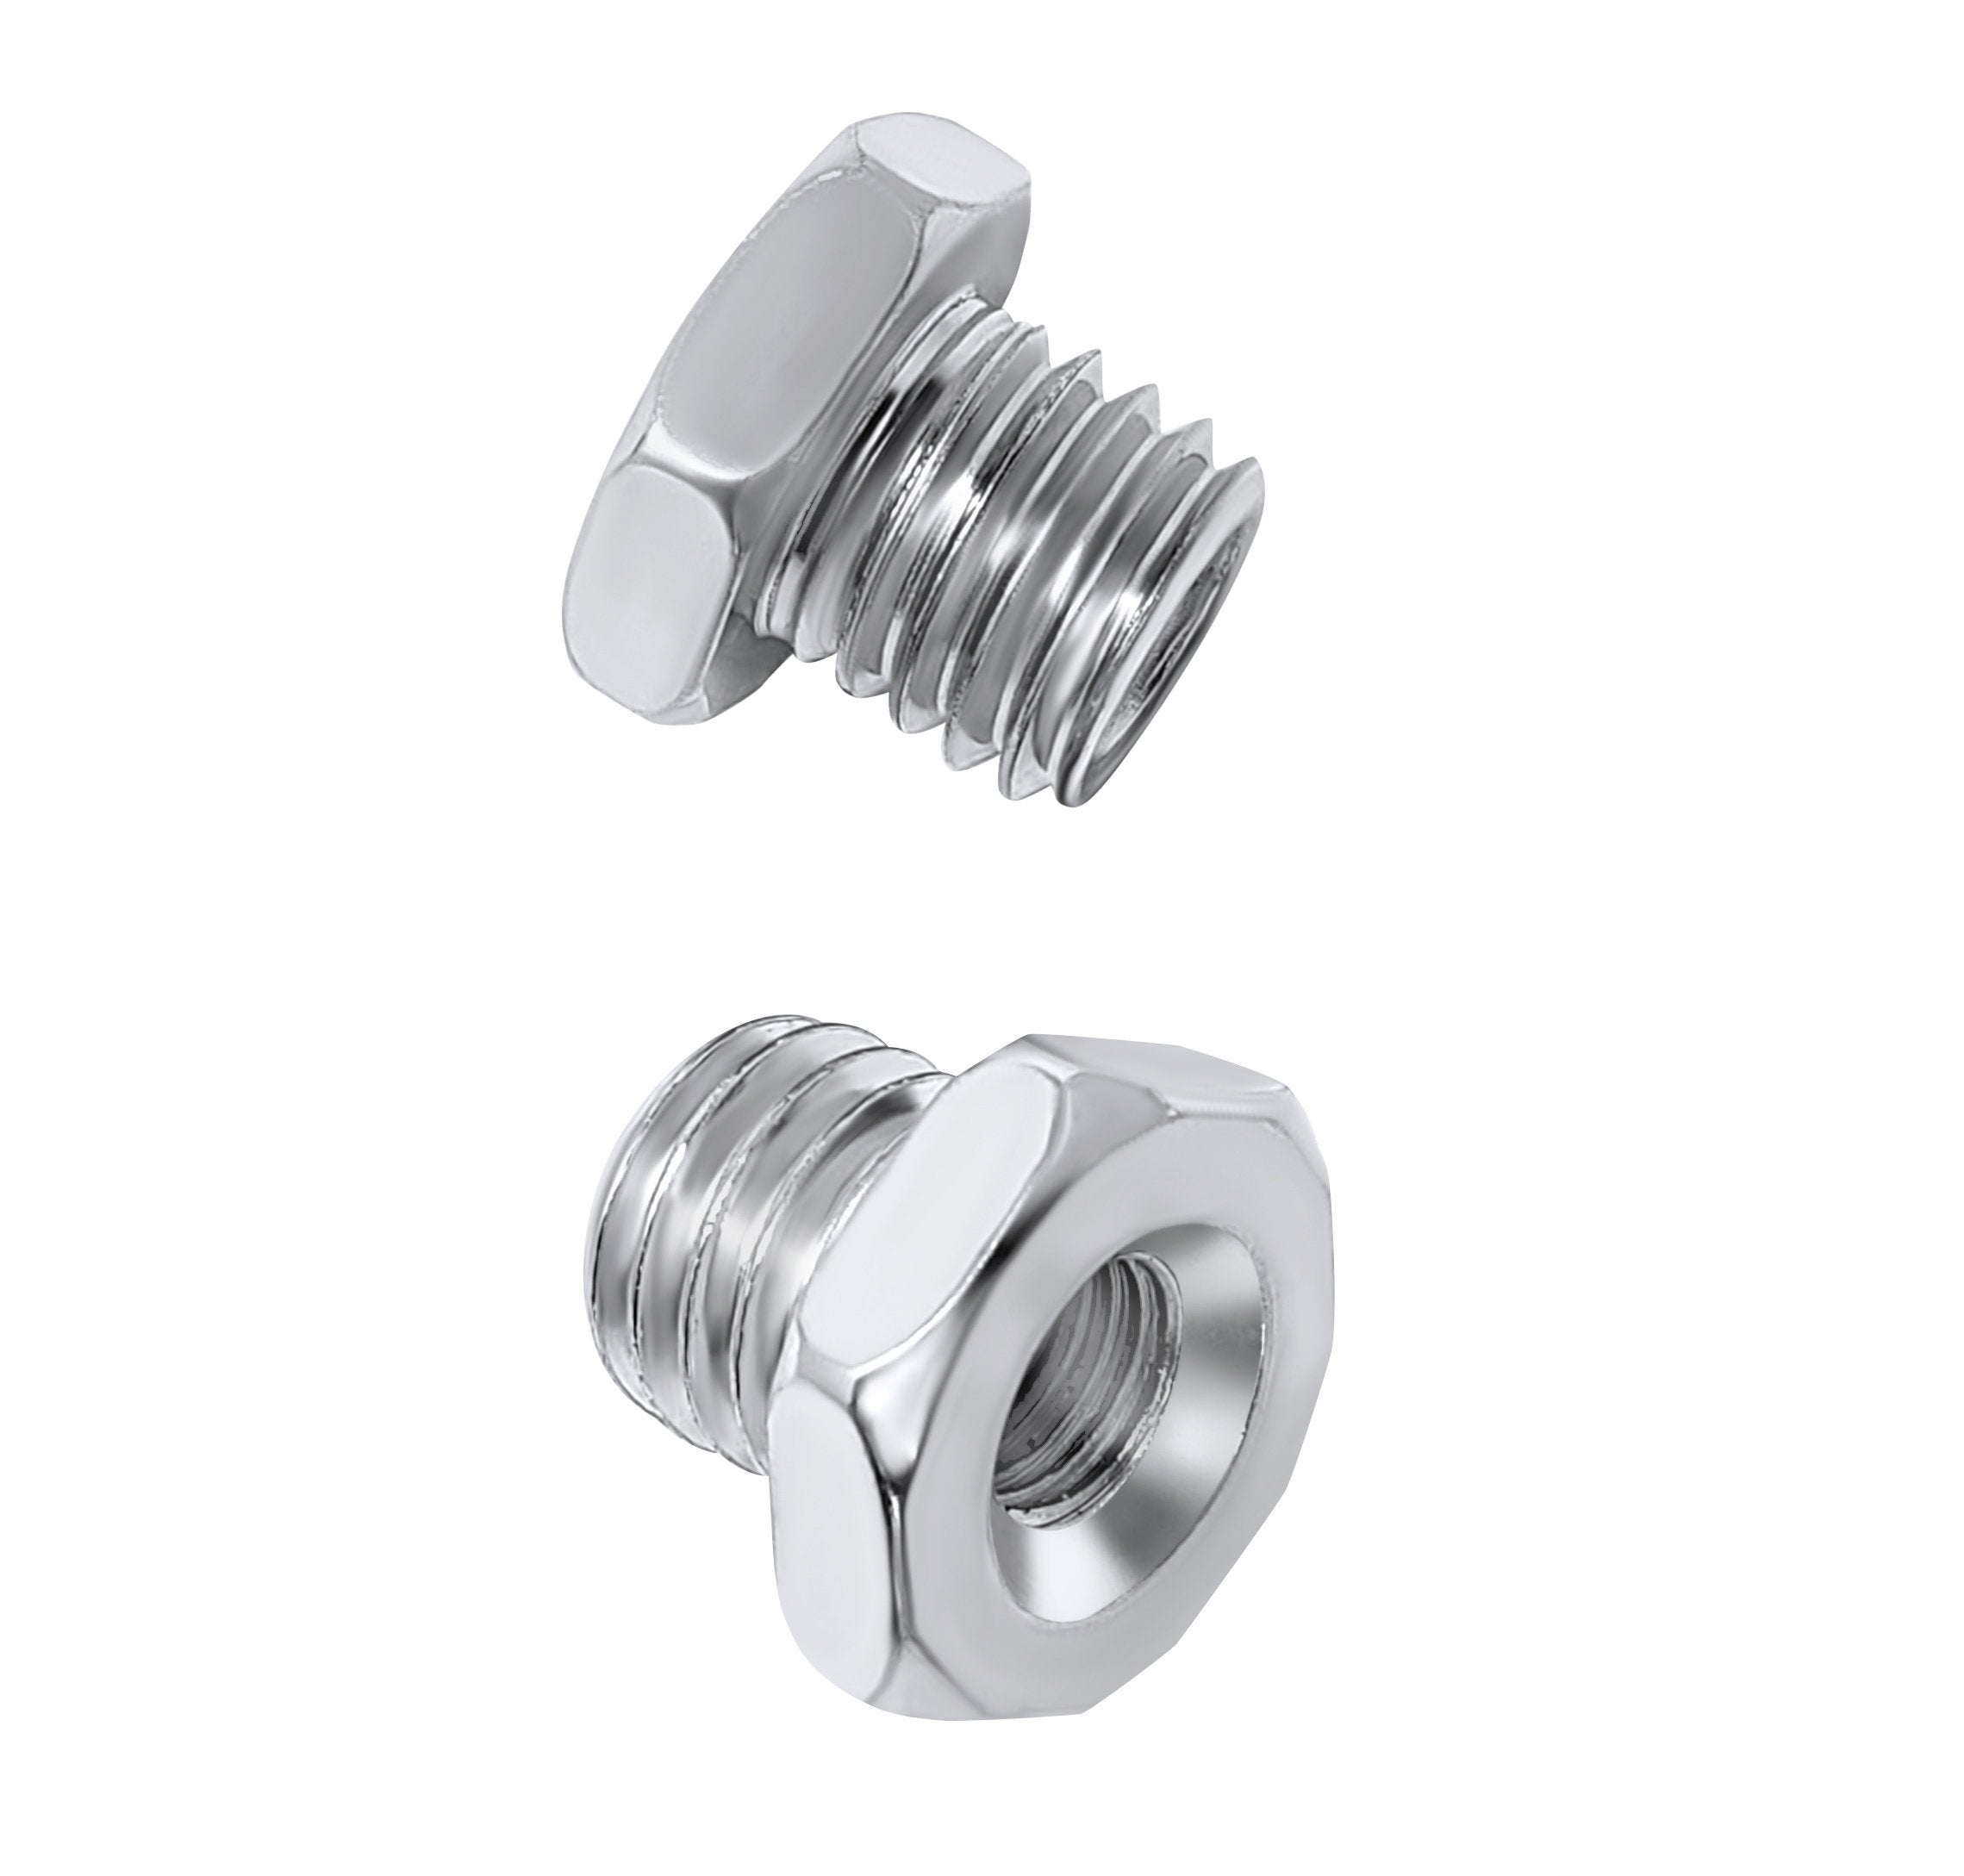 2pk Reducing Arbor Adapters for Wire Brushes on Angle Grinders From 5/8-11 to 3/8-24 UNF Arbor